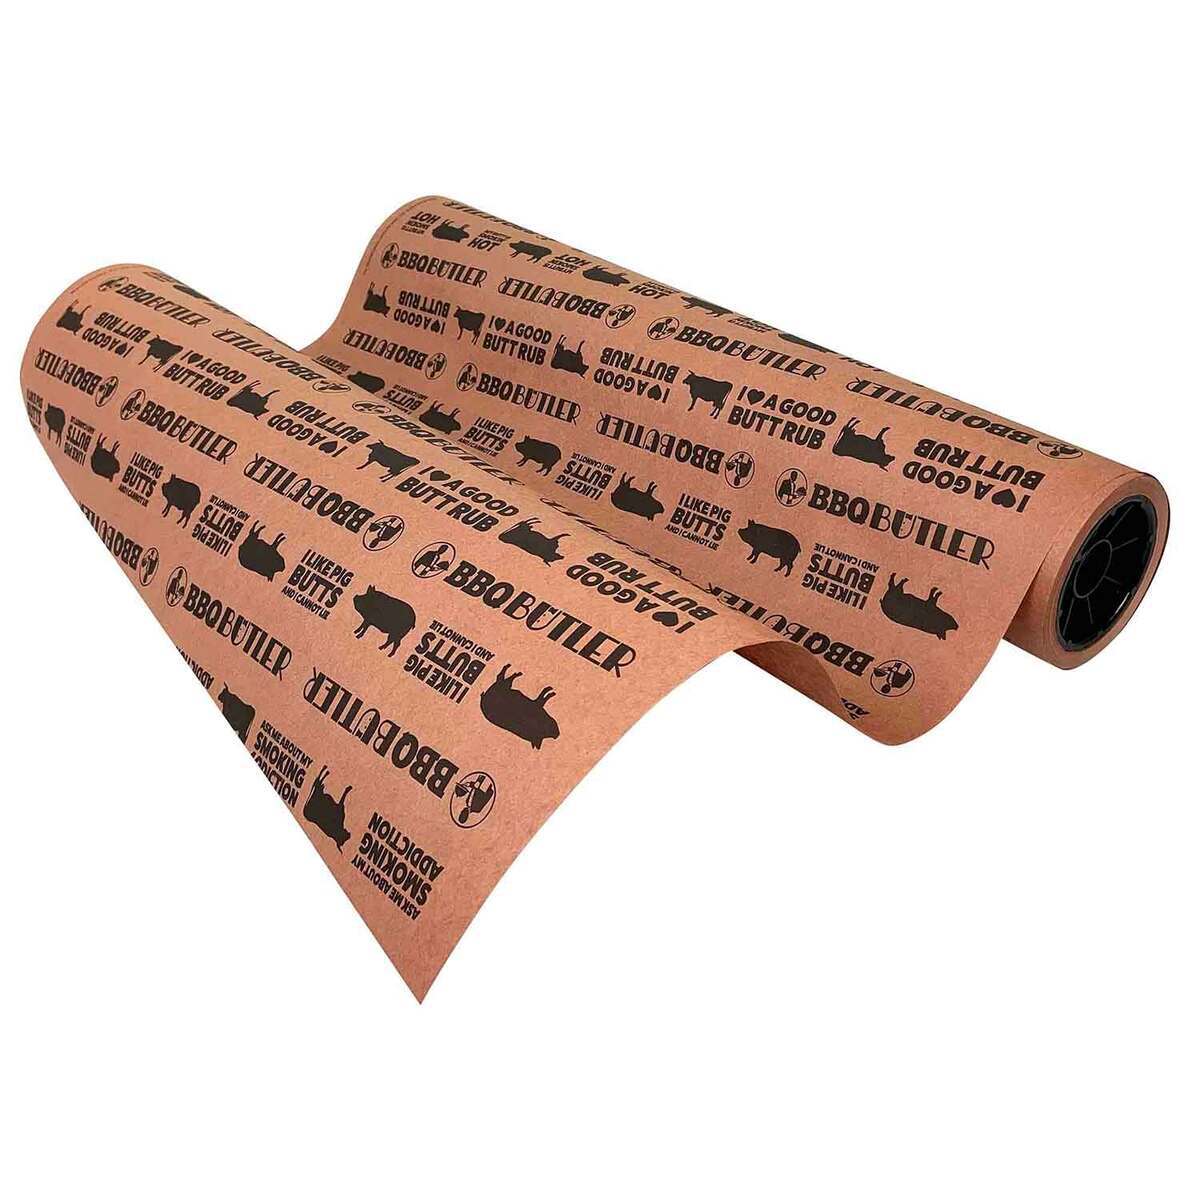 /assets/images/products/product-images/2XNTY2Q8SWBV8/64a83f7a536ab_bbq-butler-pink-butcher-paper-smoking-wrap-1771276-1.jpg